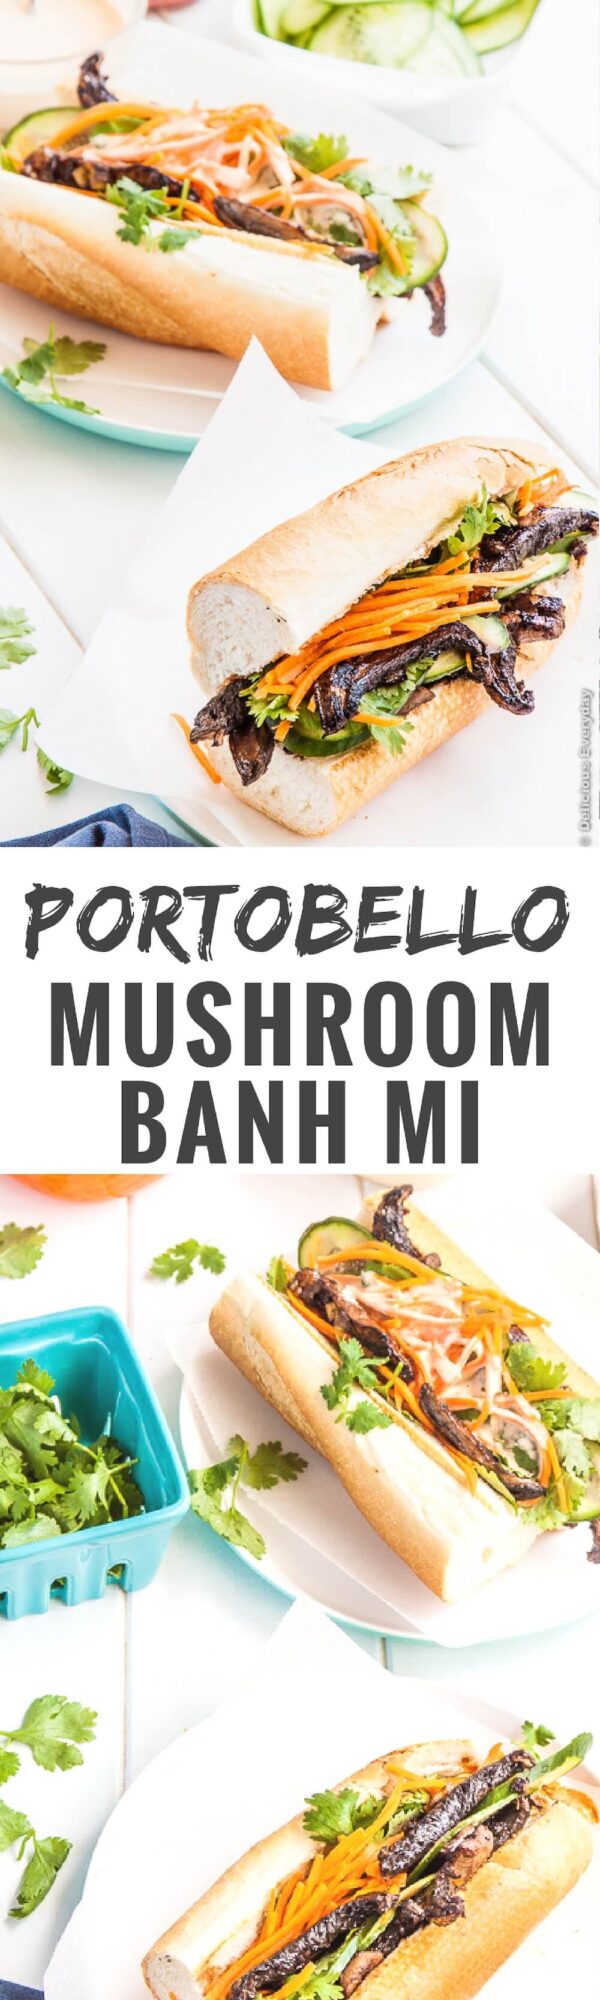 Juicy portobello mushrooms and crispy baguettes come together in this vegetarian spin on the Vietnamese classic banh mì.